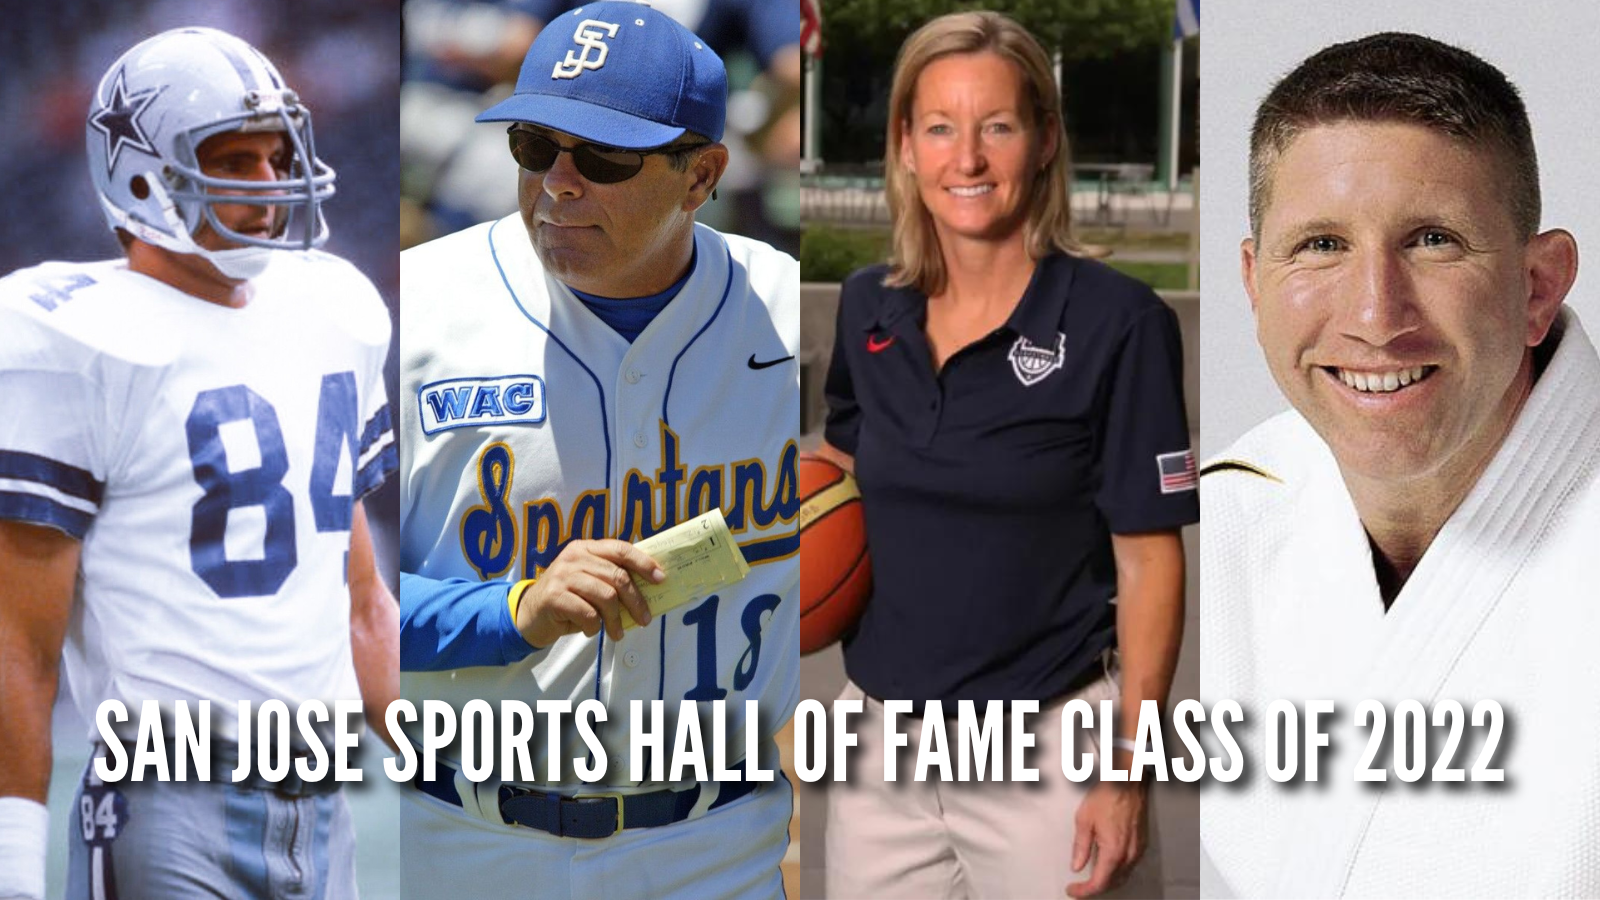 THE SAN JOSE SPORTS HALL OF FAME ANNOUNCE THE 2022 CLASS OF INDUCTEES TO BE ENSHRINED